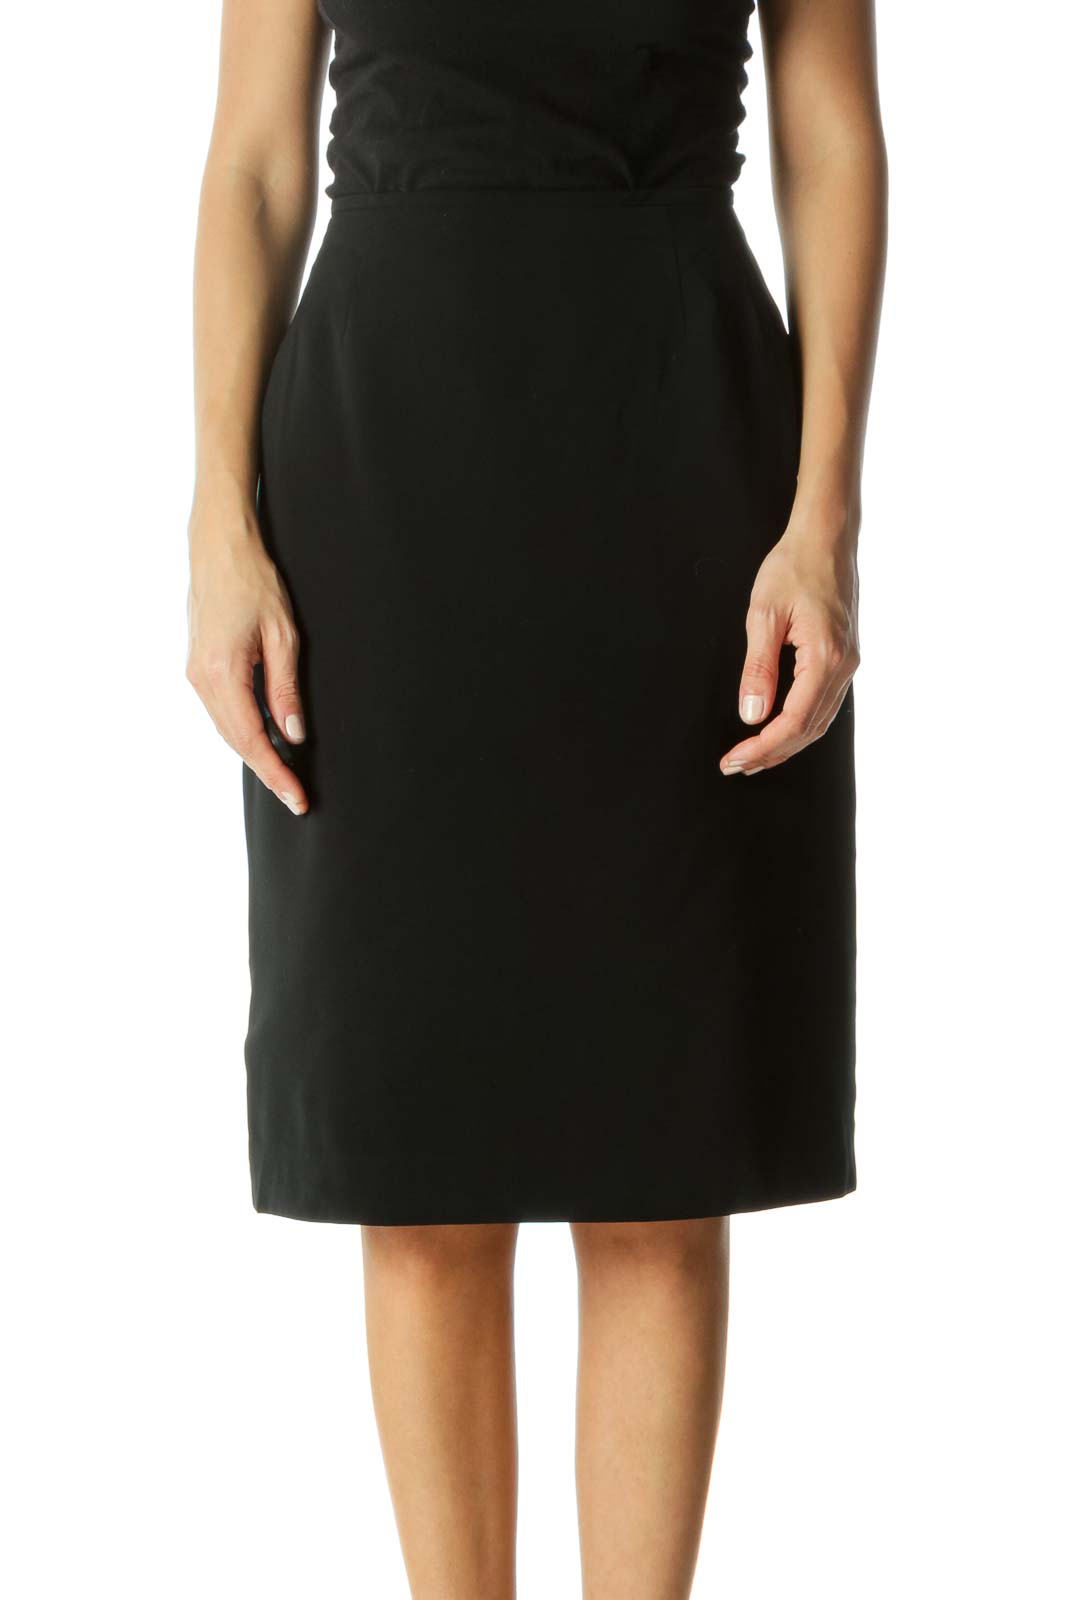 Black Cinched-Waist Lined A-Line Skirt (Petite) Front